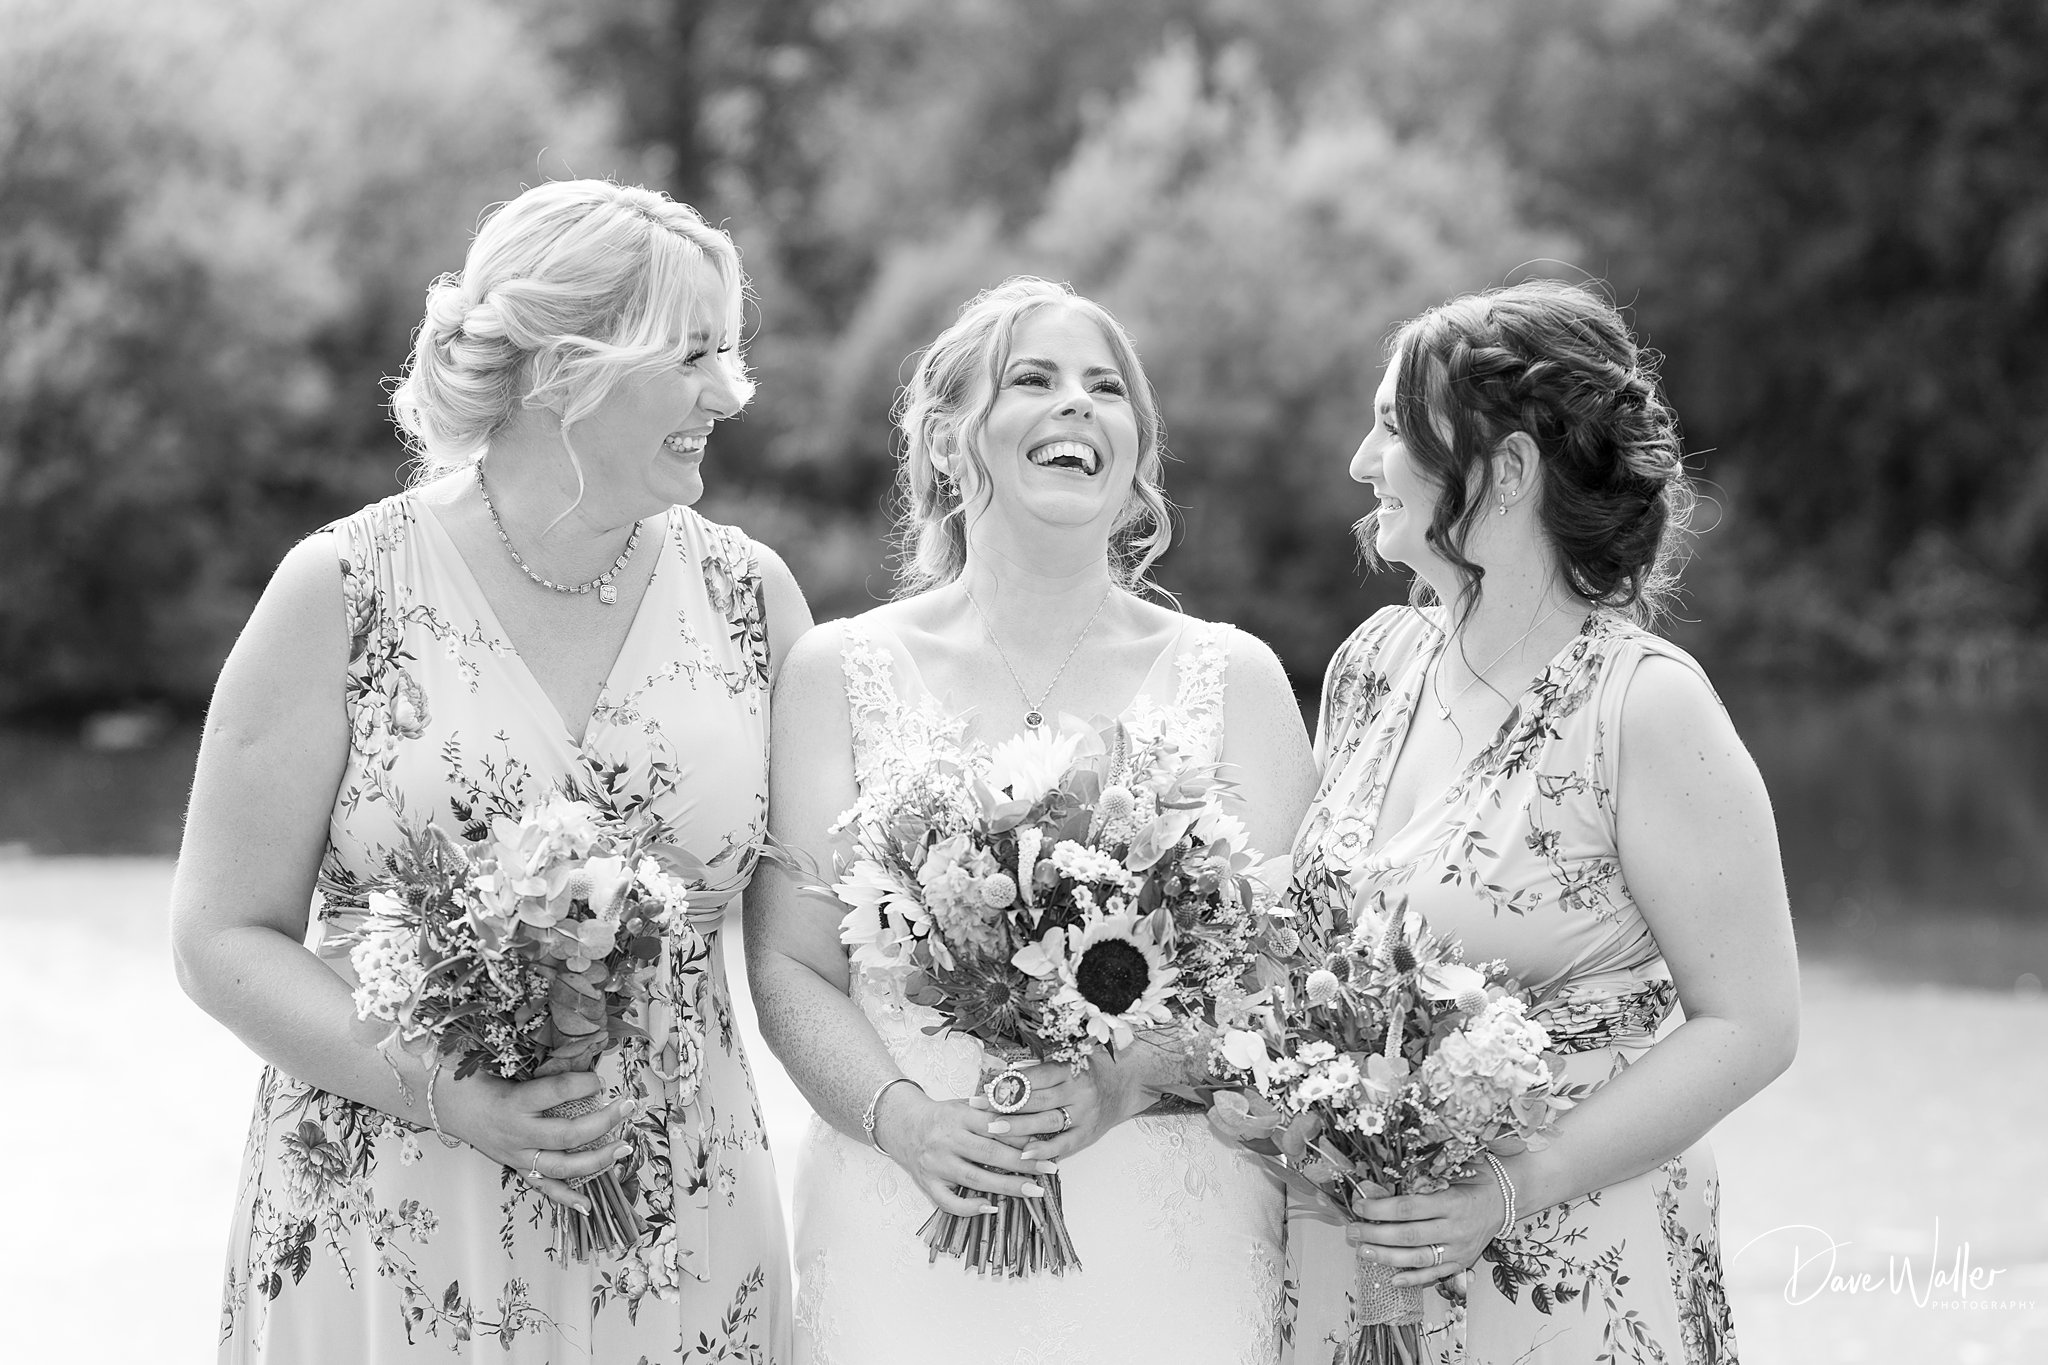 Three women in joyful laughter, sharing a moment of happiness, with the bride at the center, flanked by her bridesmaids, all holding beautiful bouquets.